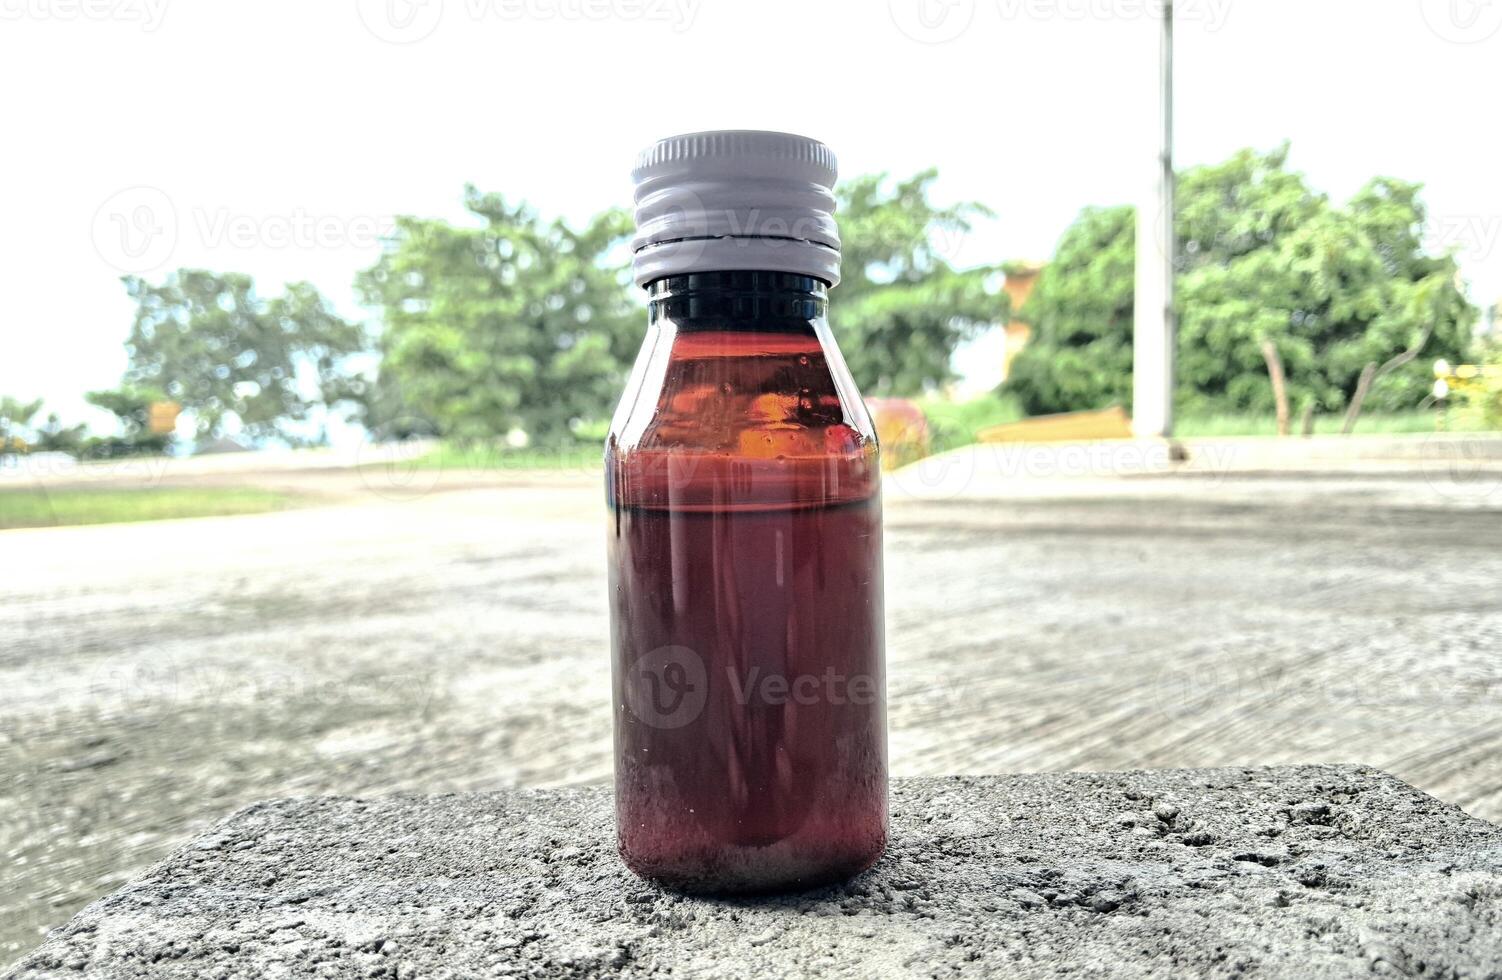 Amber Small Medicine Glass Bottle for Mockup collection photo